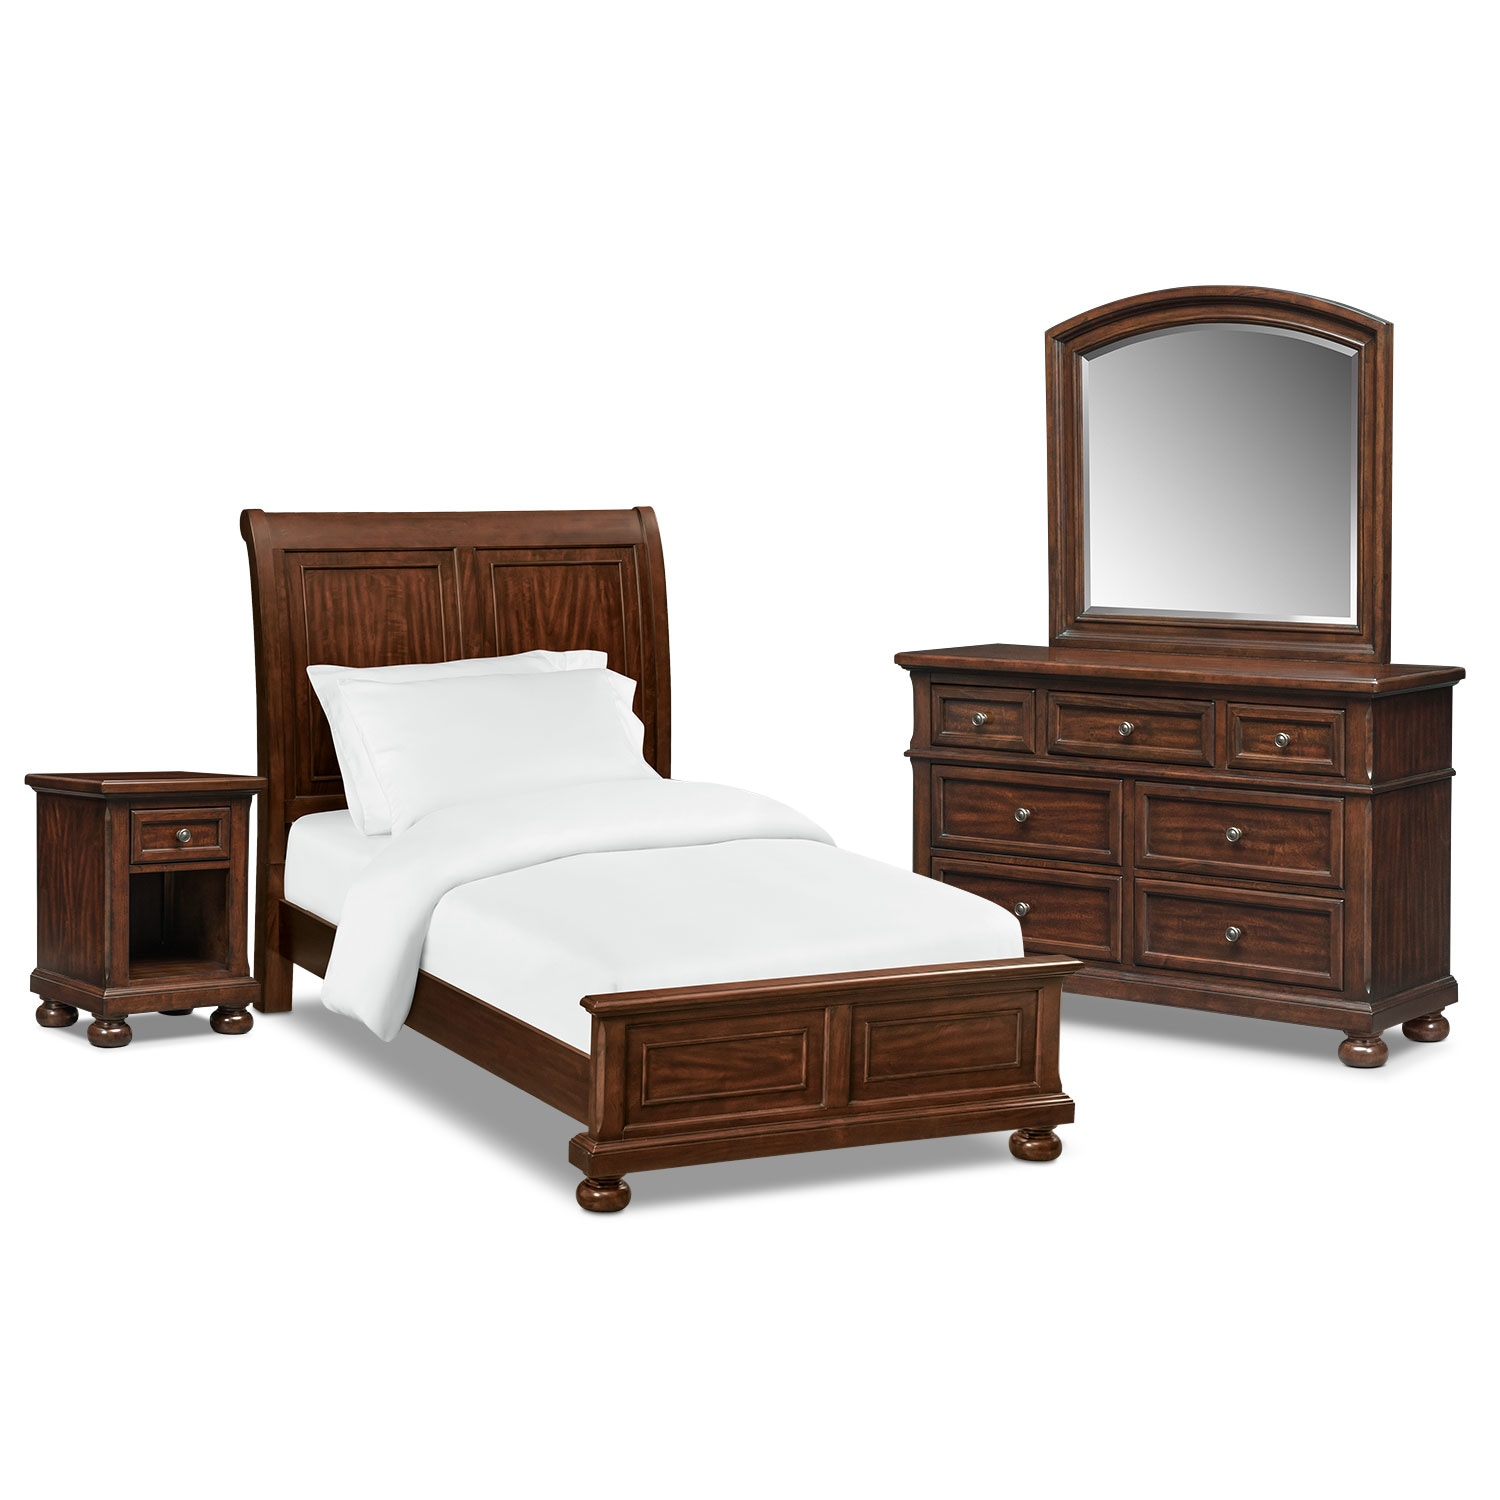 Hanover Youth 6 Piece Sleigh Bedroom Set With Nightstand Dresser And Mirror for dimensions 1500 X 1500